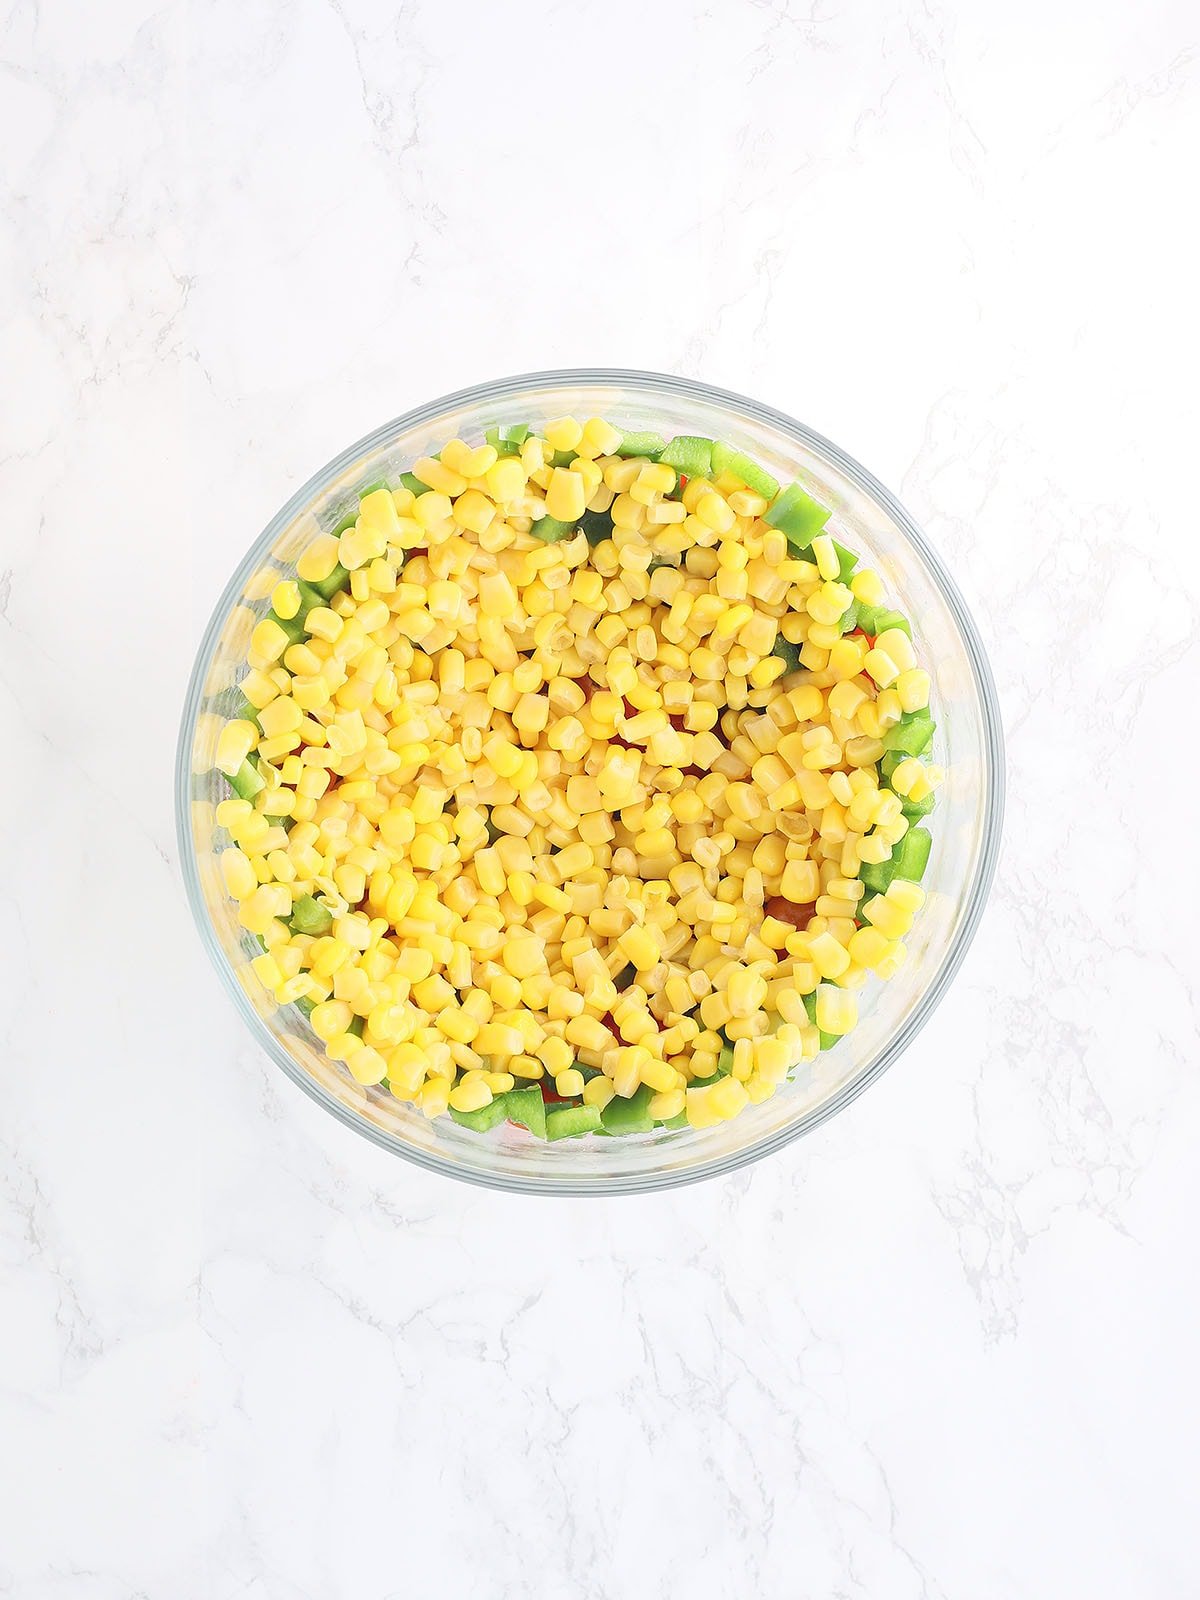 cornbread salad topped with whole kernel corn